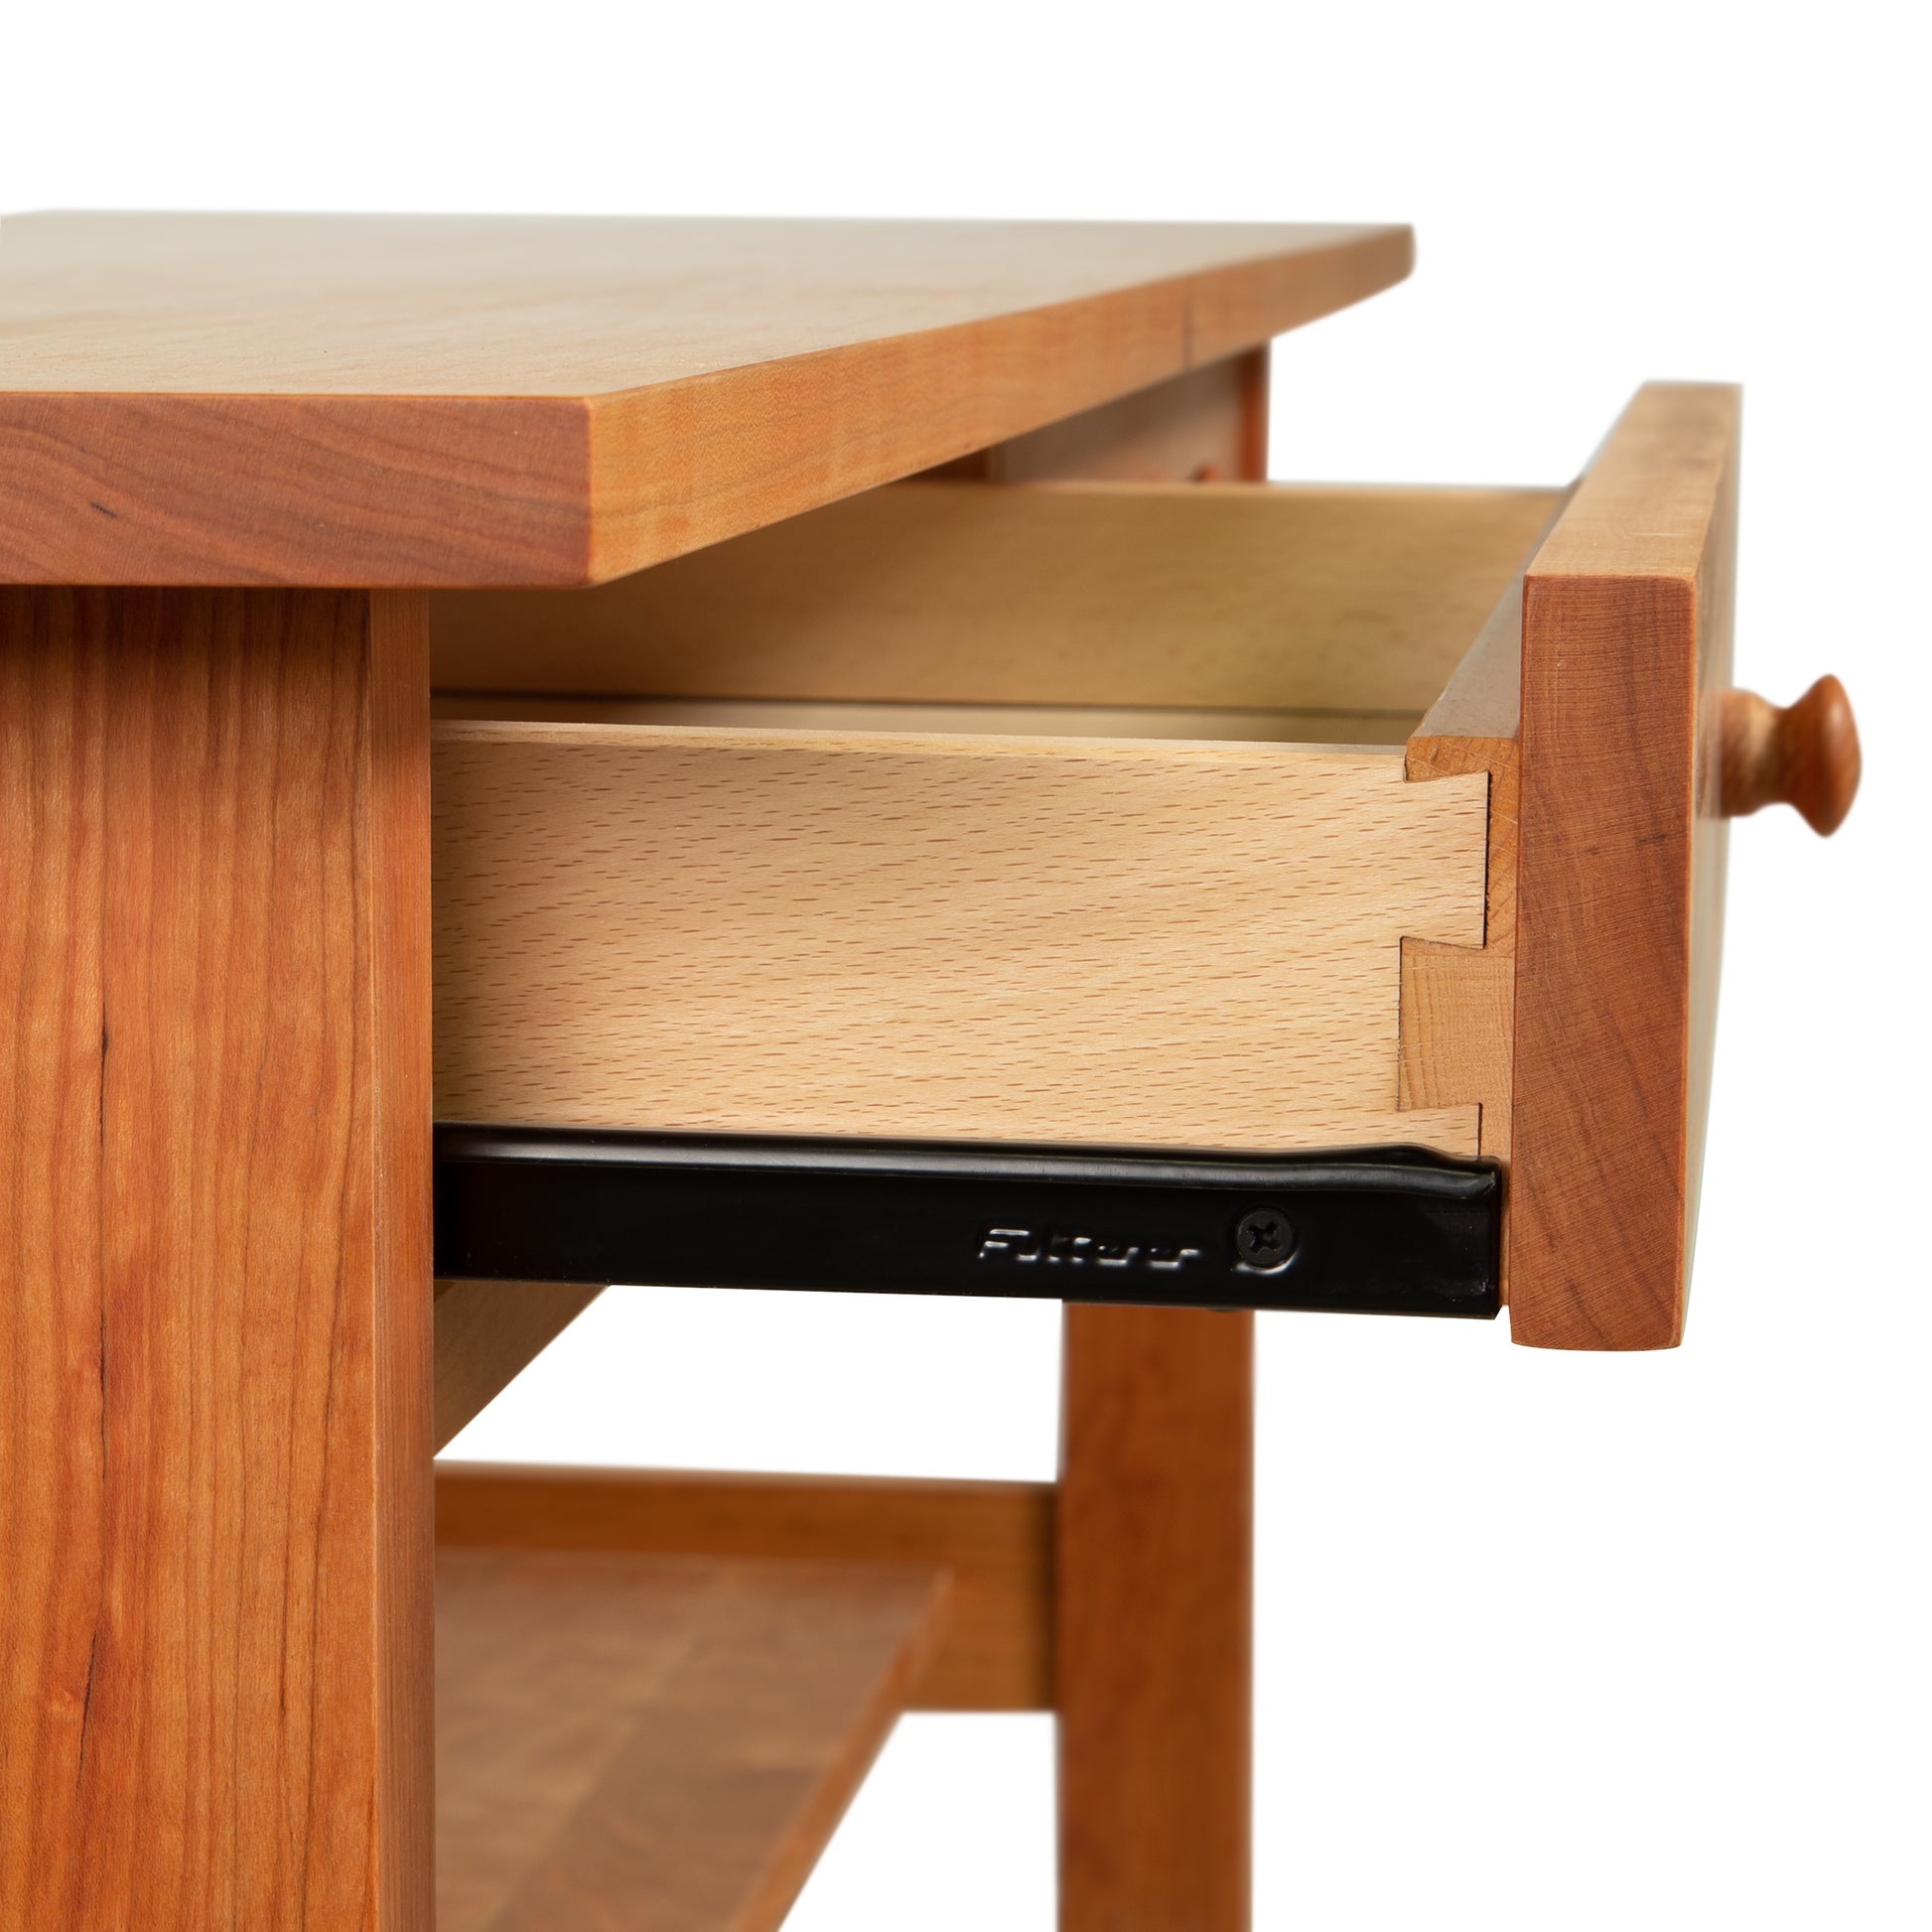 A Burlington Shaker 2-Drawer Coffee Table by Vermont Furniture Designs, with an open drawer, featuring dovetail joints and a metal slide mechanism.